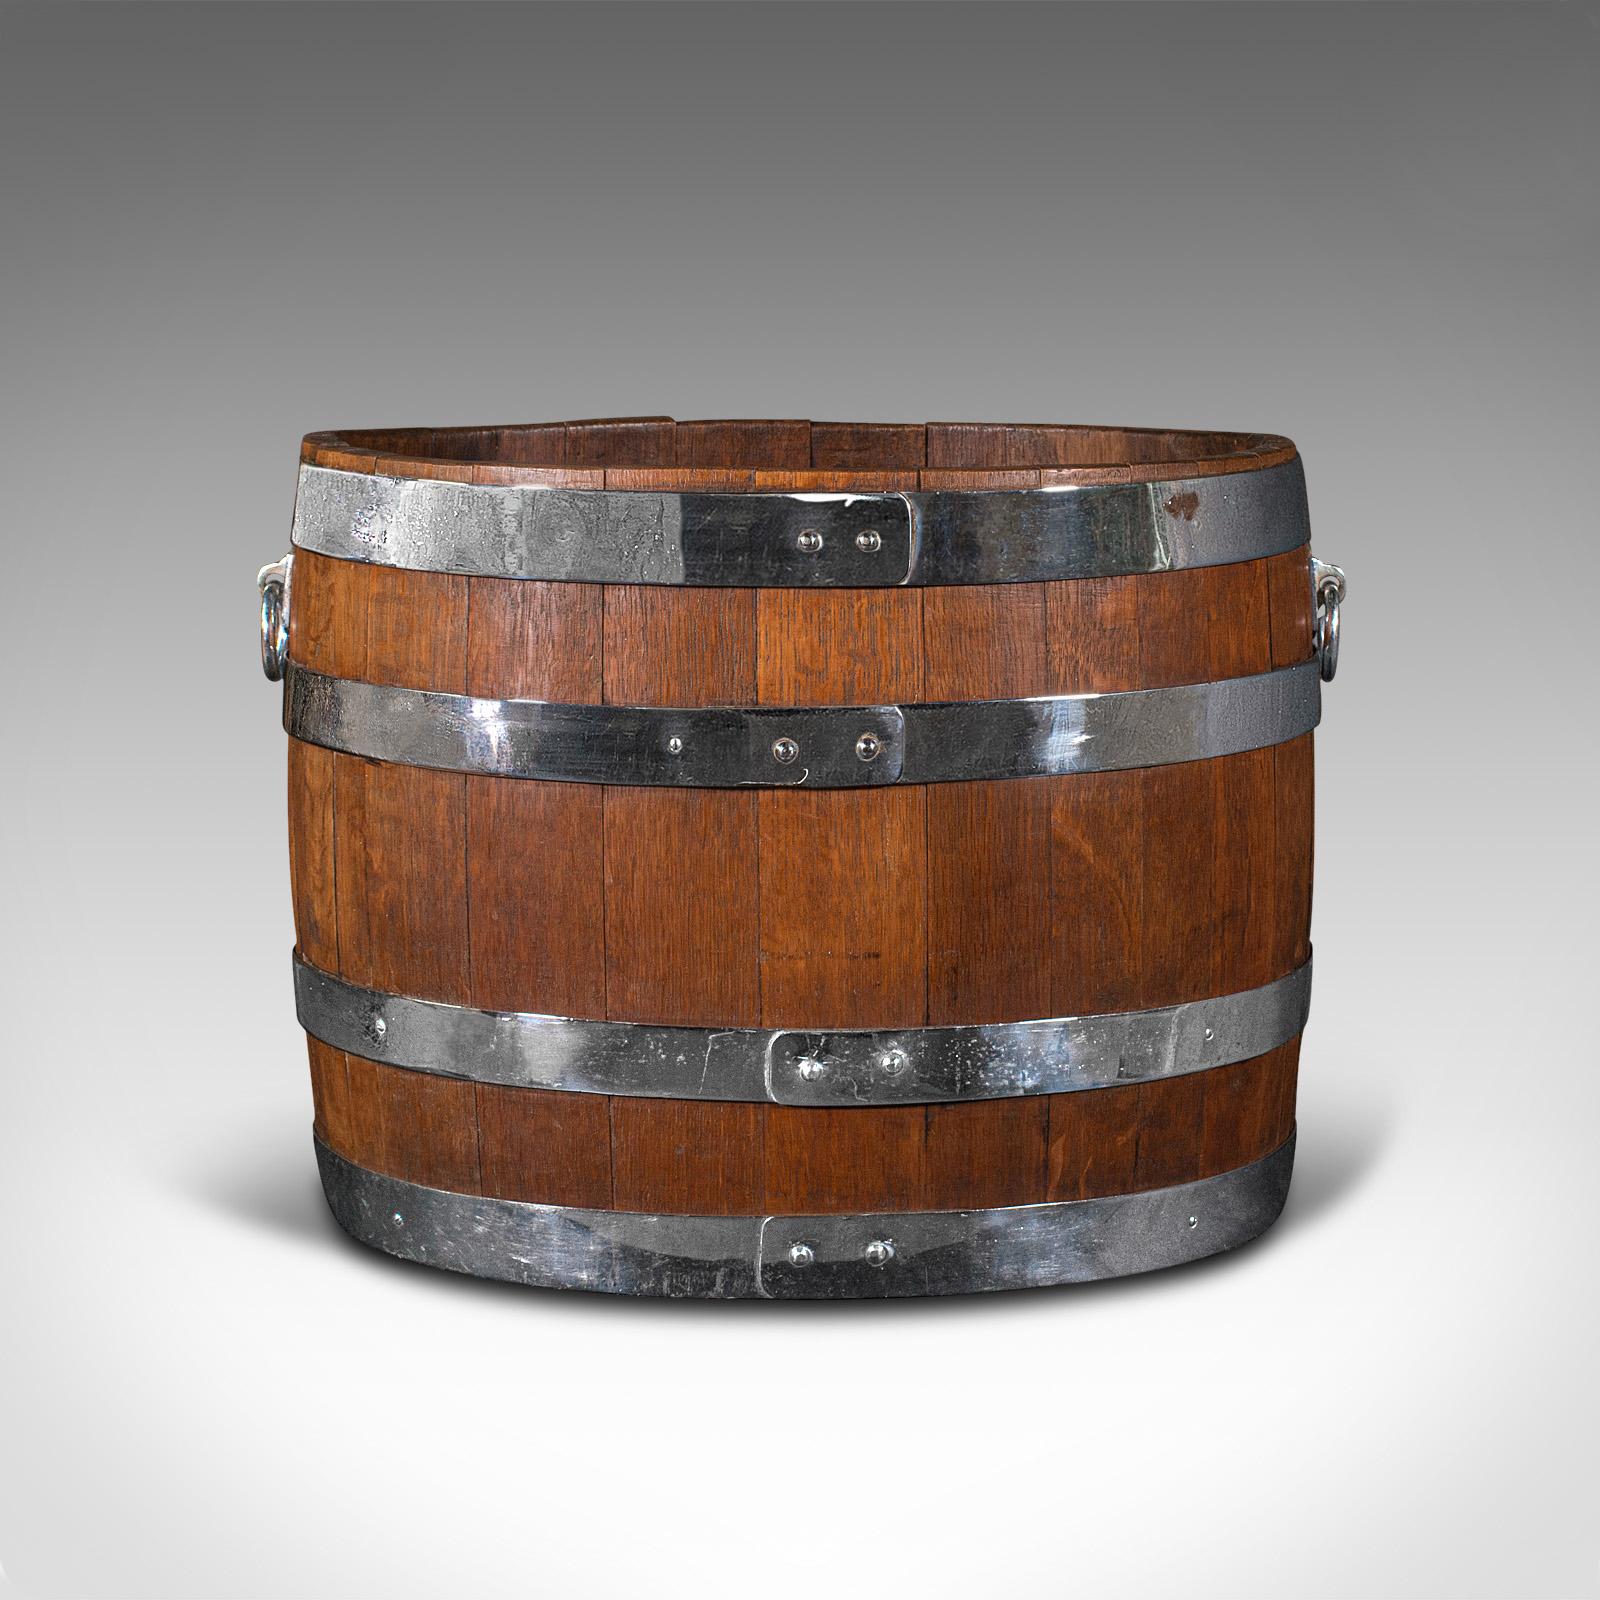 This is an antique fireside bin. An English, oak and chrome coopered half barrel log or coal cask, dating to the Victorian period, circa 1850.

Of appealing, unusual oval form and character
Displays a desirable aged patina throughout
Select oak